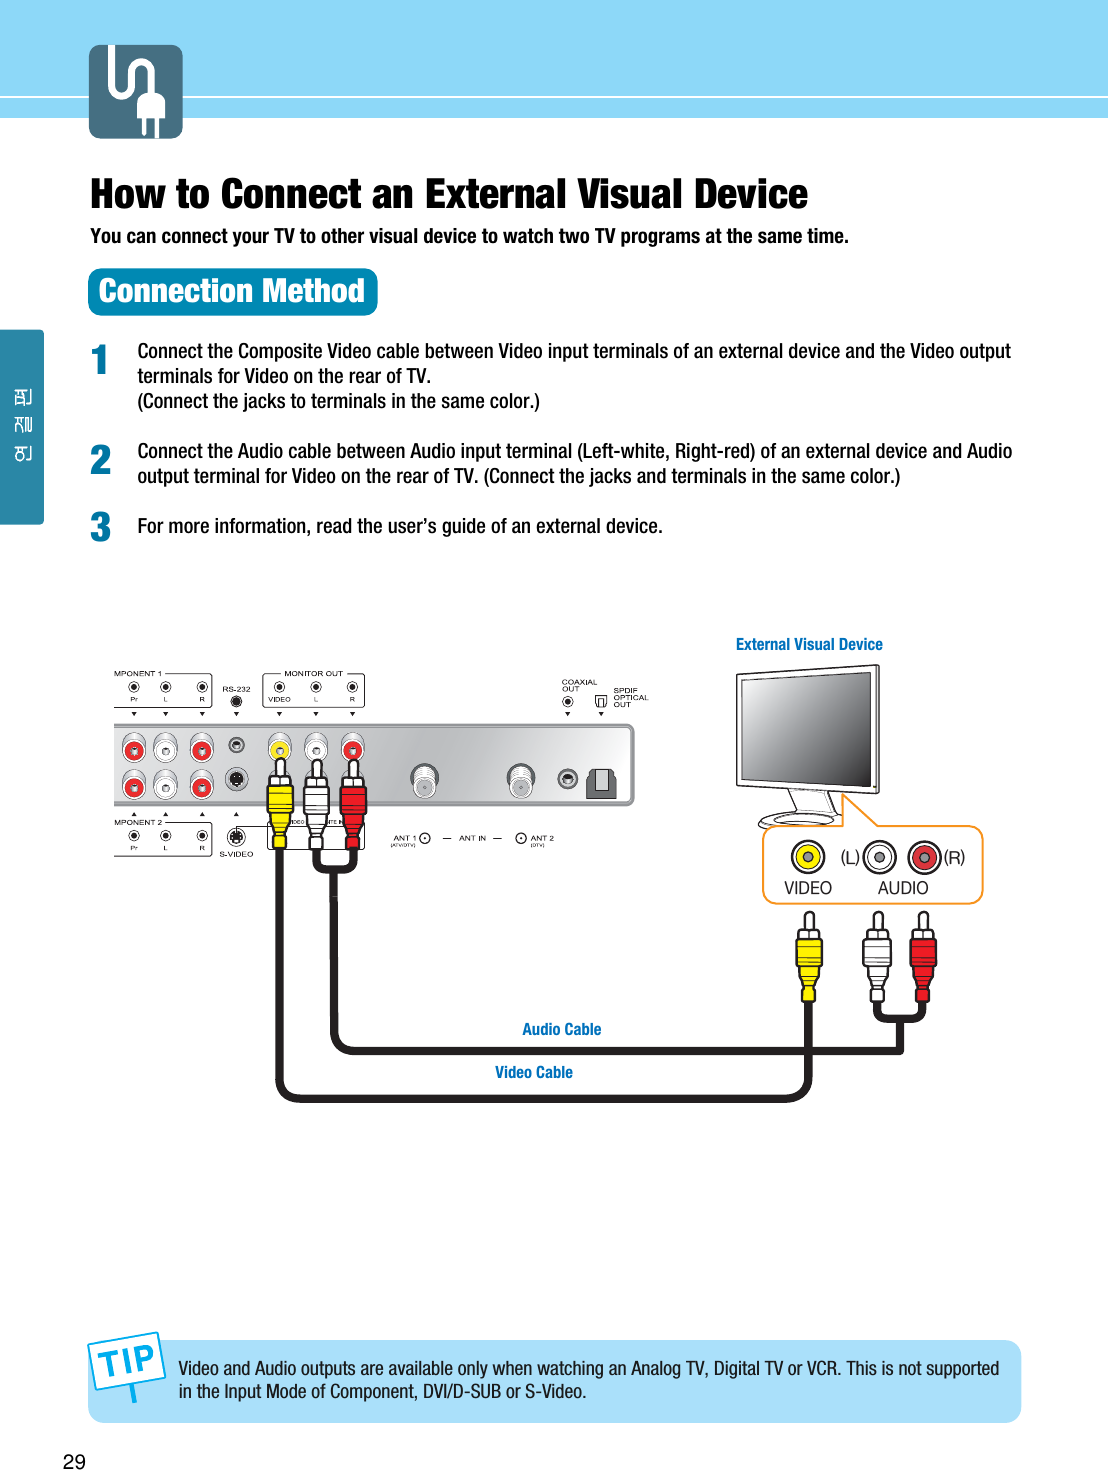 29How to Connect an External Visual DeviceYou can connect your TV to other visual device to watch two TV programs at the same time.Connection MethodConnect the Composite Video cable between Video input terminals of an external device and the Video outputterminals for Video on the rear of TV.(Connect the jacks to terminals in the same color.)Connect the Audio cable between Audio input terminal (Left-white, Right-red) of an external device and Audiooutput terminal for Video on the rear of TV. (Connect the jacks and terminals in the same color.)For more information, read the user’s guide of an external device.123)=,17&gt;1,-7:4External Visual DeviceAudio CableVideo CableVideo and Audio outputs are available only when watching an Analog TV, Digital TV or VCR. This is not supportedin the Input Mode of Component, DVI/D-SUB or S-Video. 